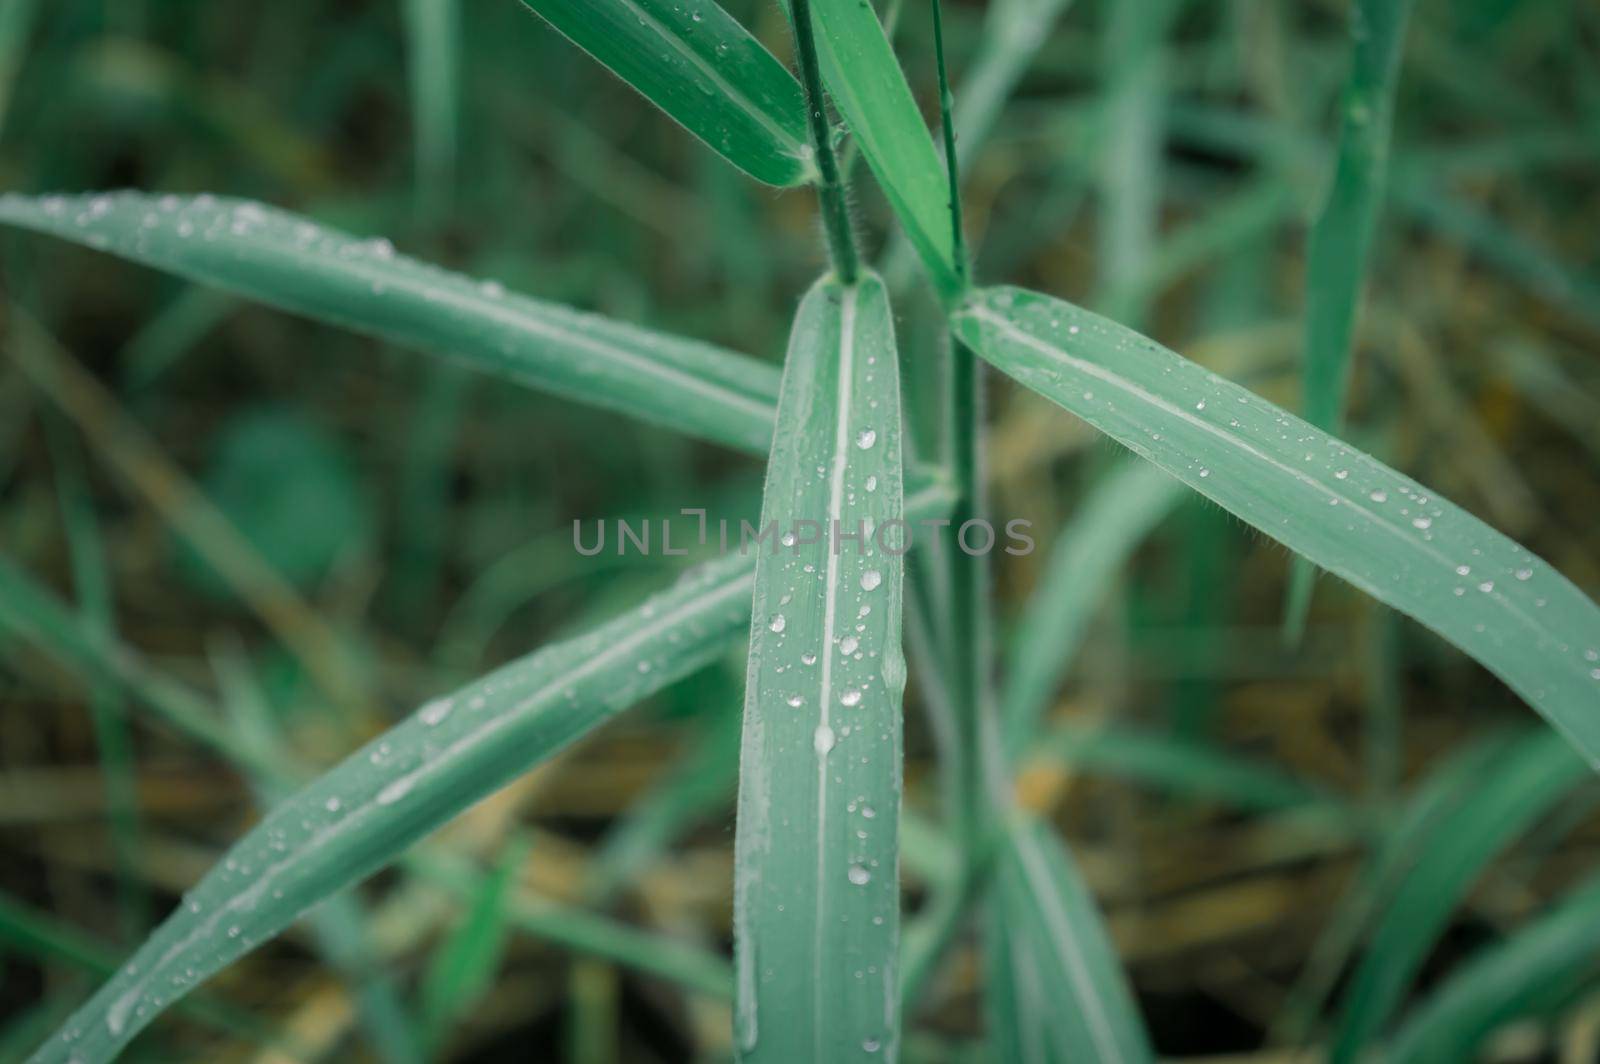 Raindrops on leaf. Rain drop on Leaves. Extreme Close up of rain water dew droplets on blade of grass. Sunlight reflection. Winter rainy season. Beauty in nature abstract background. Macro photography